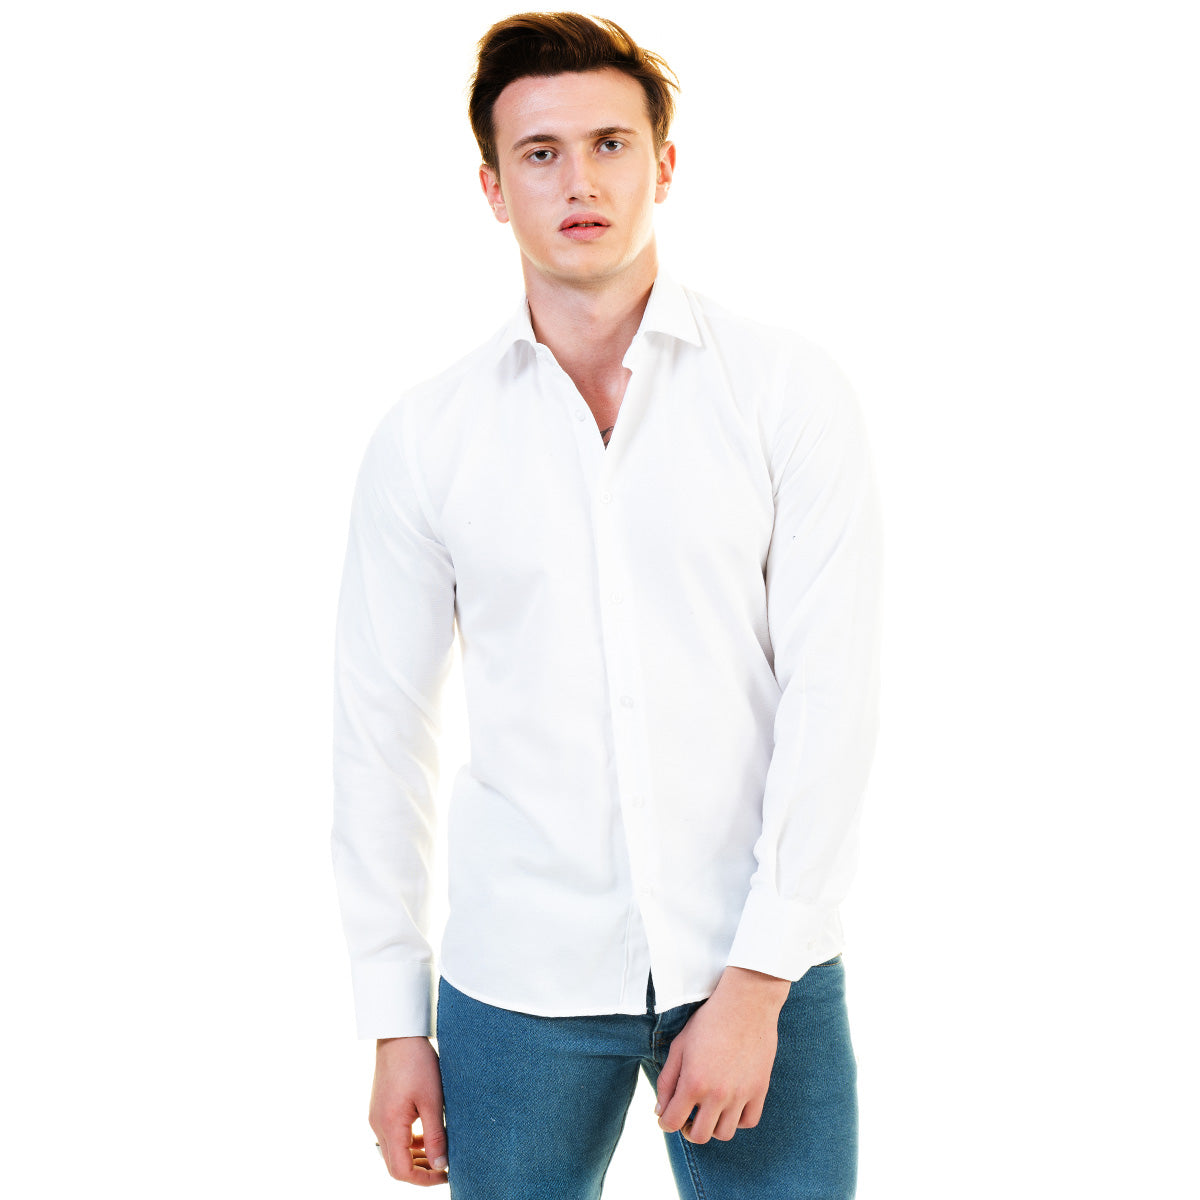 Solid White Mens Slim Fit Designer Dress Shirt - Tailored Cotton Shirts For Work And Casual